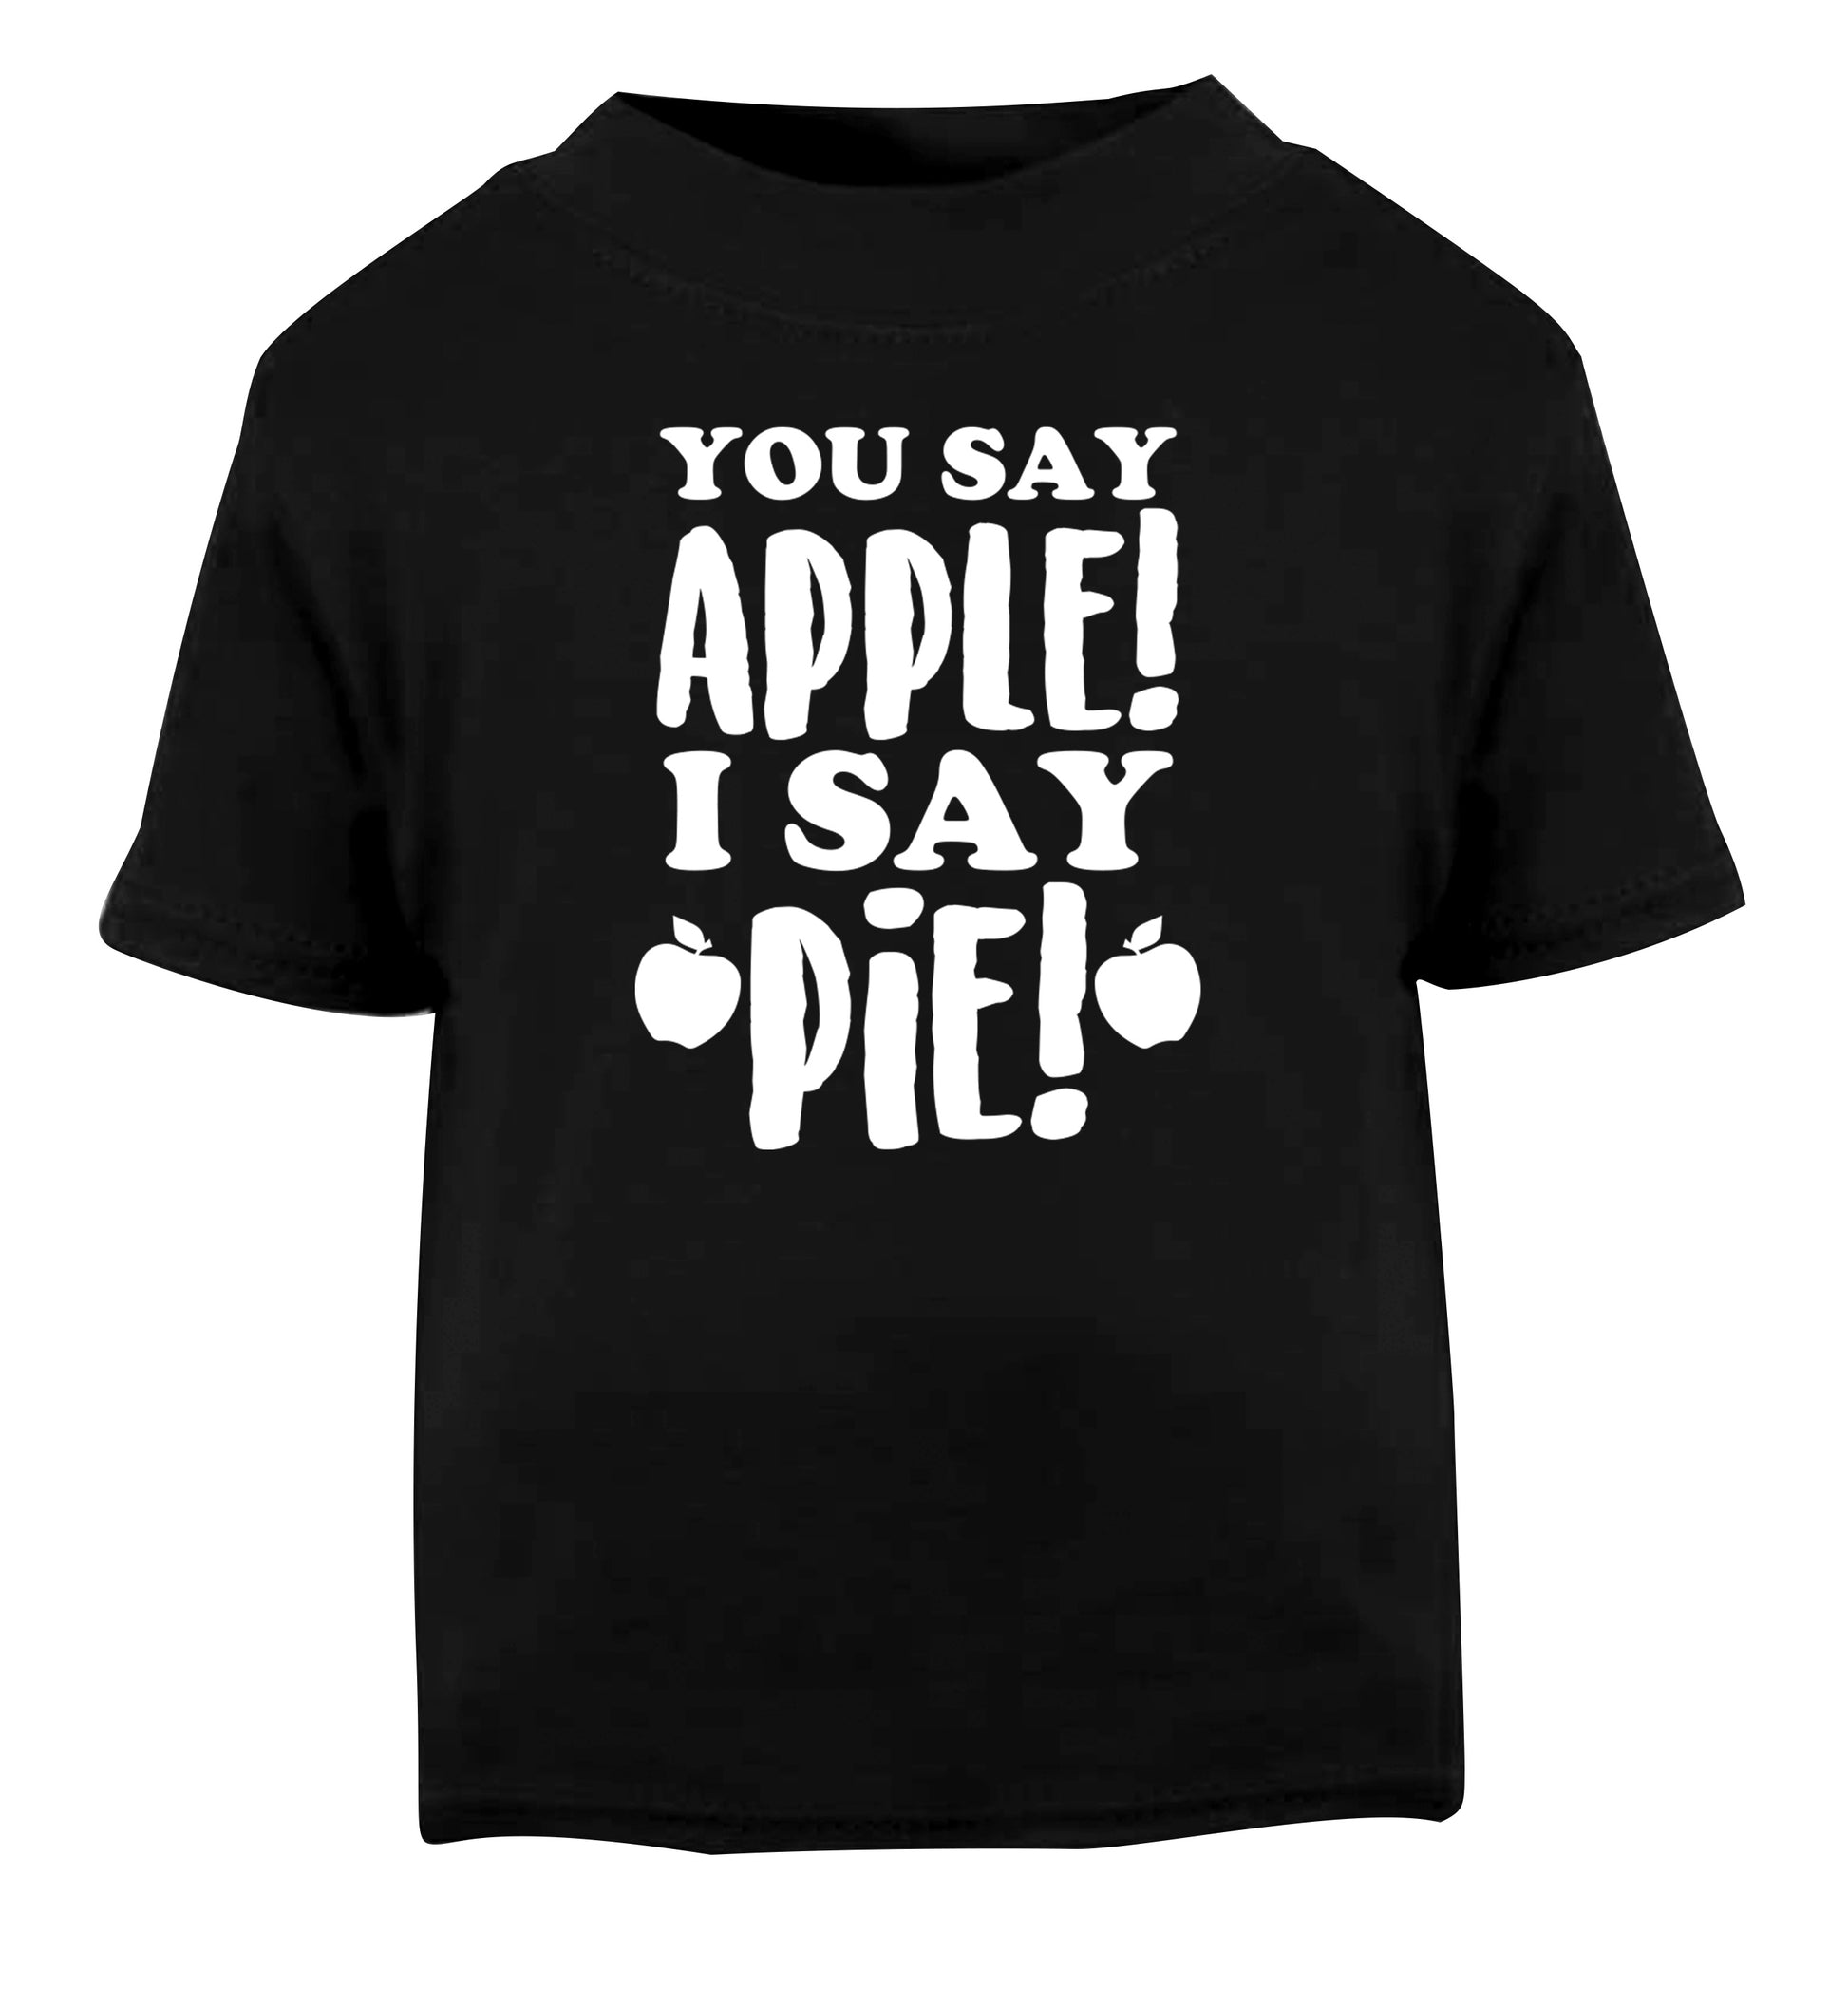 You say apple I say pie! Black Baby Toddler Tshirt 2 years